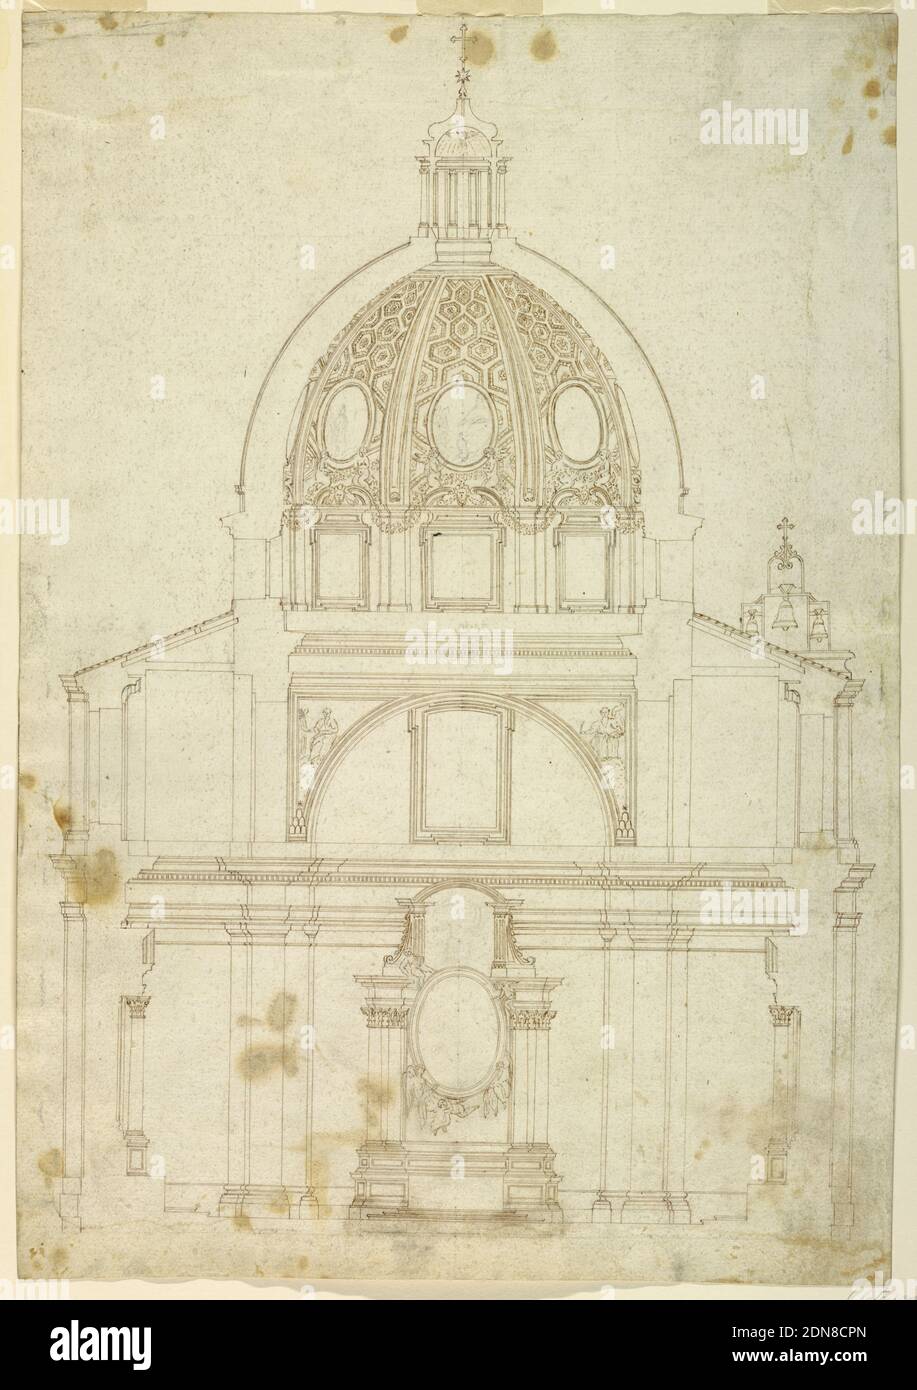 Cross section of church of S. Tommaso da Villanova, Giovanni Lorenzo Bernini, 1598 – 1680, Pencil, pen, and bistre ink on paper, Cross section of a church with a cupola, S. Tommaso da Villanova at Castelgandolfo. The altar with the frame of an oval painting supported by angels. Above the entablature the star and mountains, charges of the coat of arms of Pope Alexander VII. Two evangelists sitting upon clouds. On the roof, at right, the bell gables., Italy, ca. 1655–67, architecture, Drawing Stock Photo